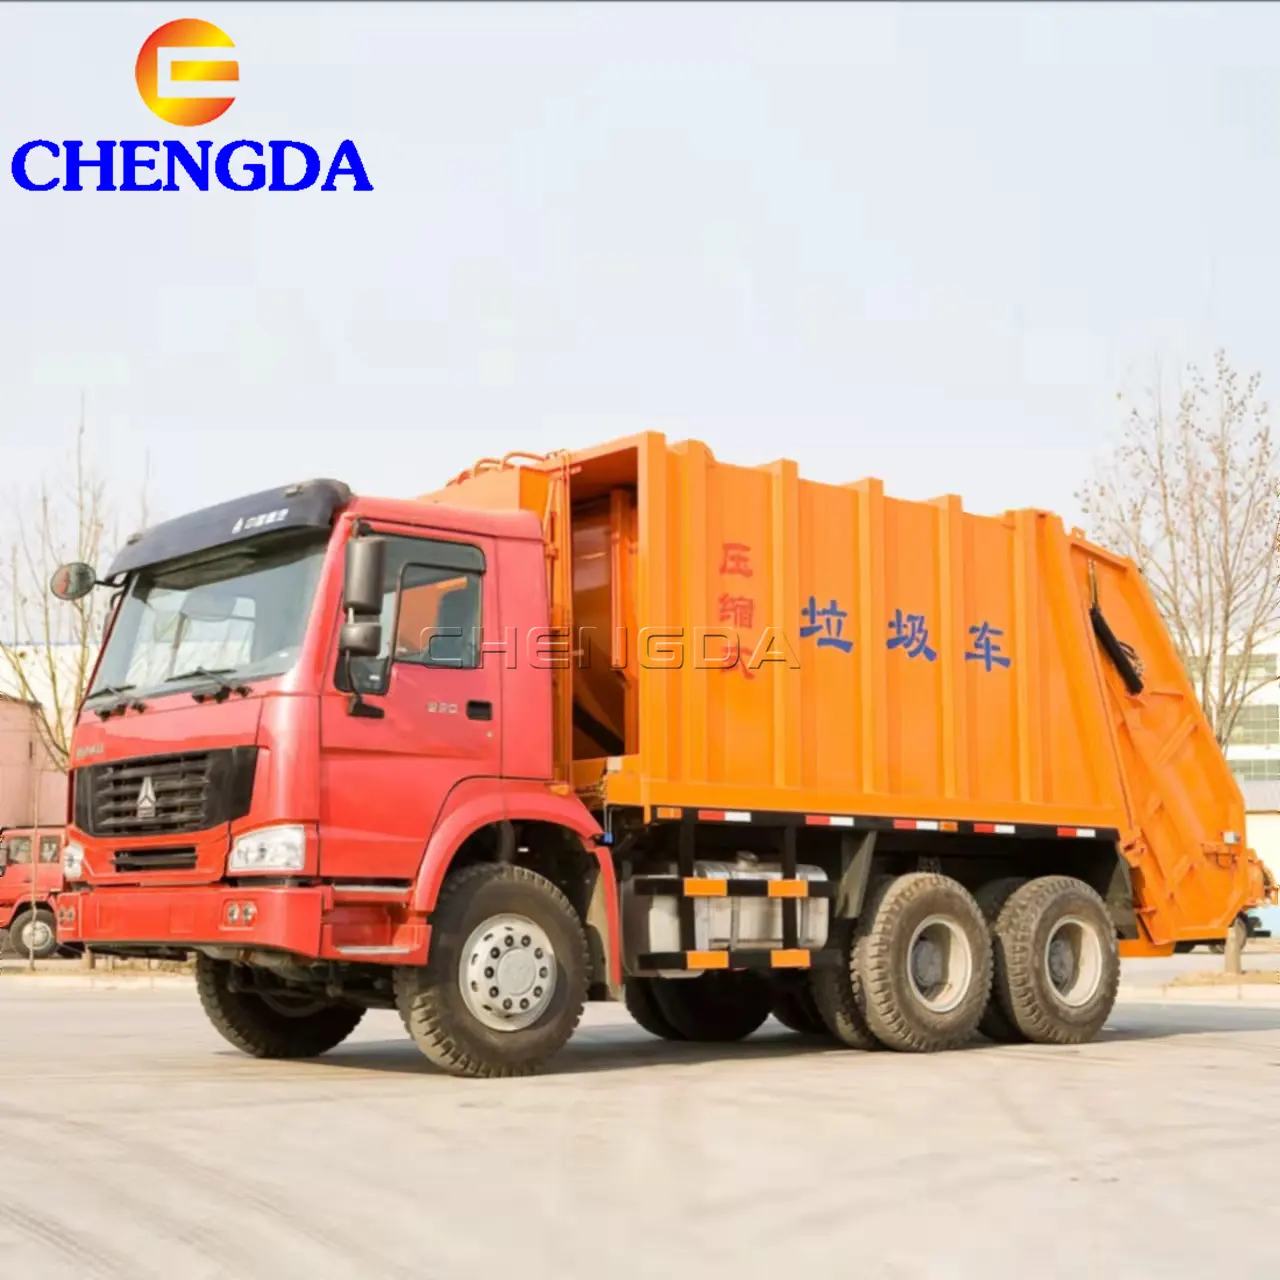 China Rear Loader Waste Collector Trash Compactor Garbage Truck